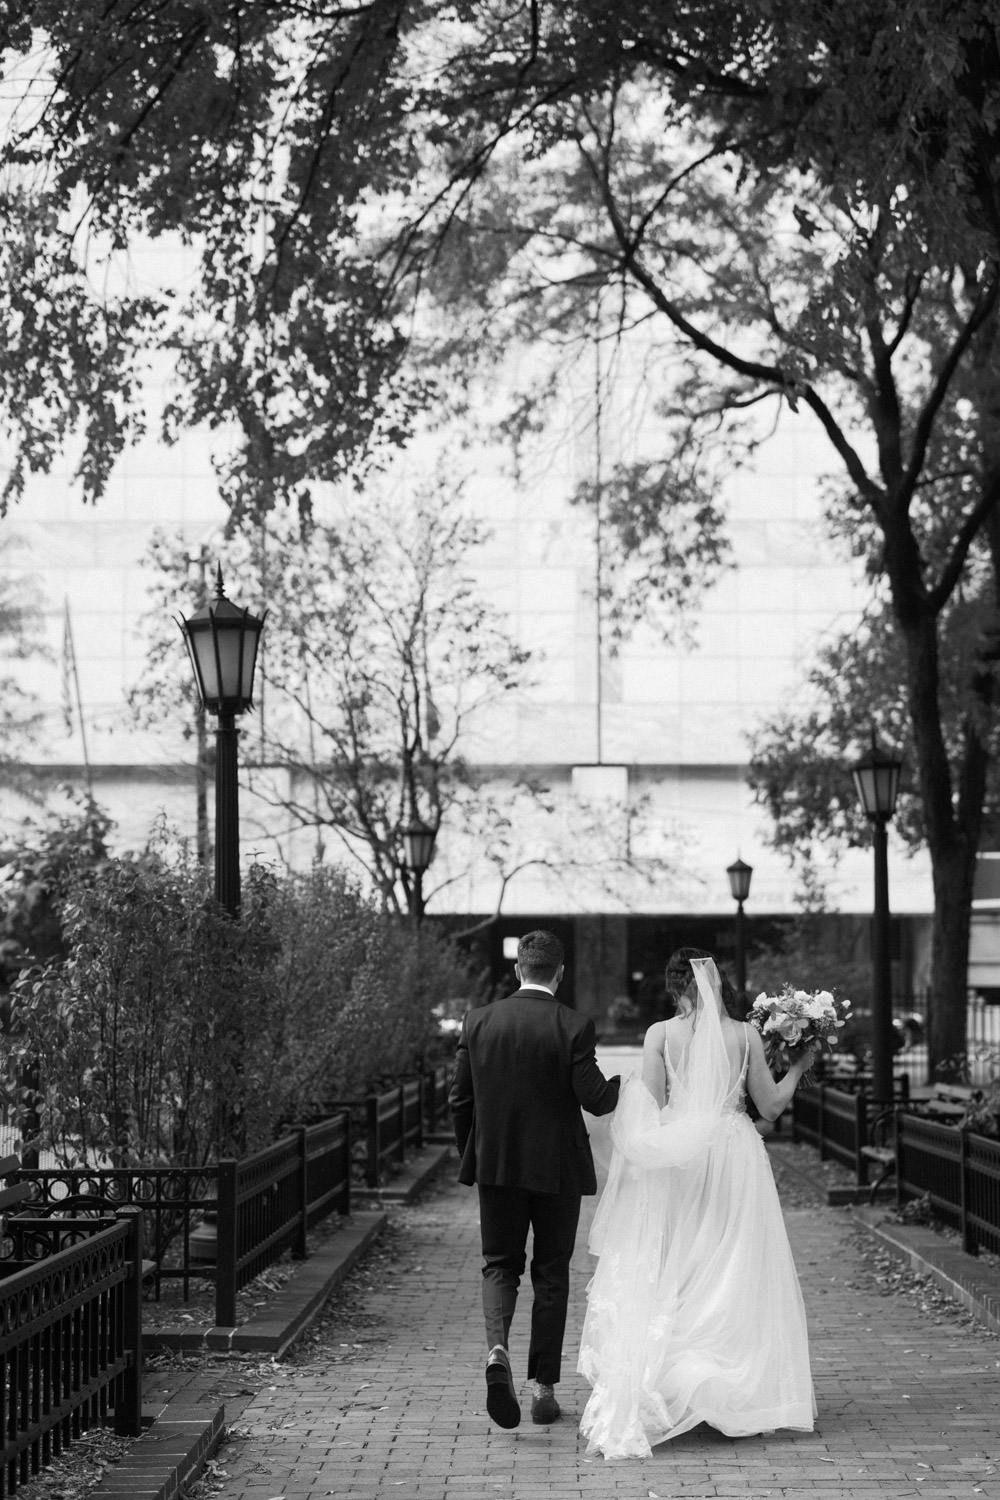 A first look moment in Seneca Park in downtown Chicago